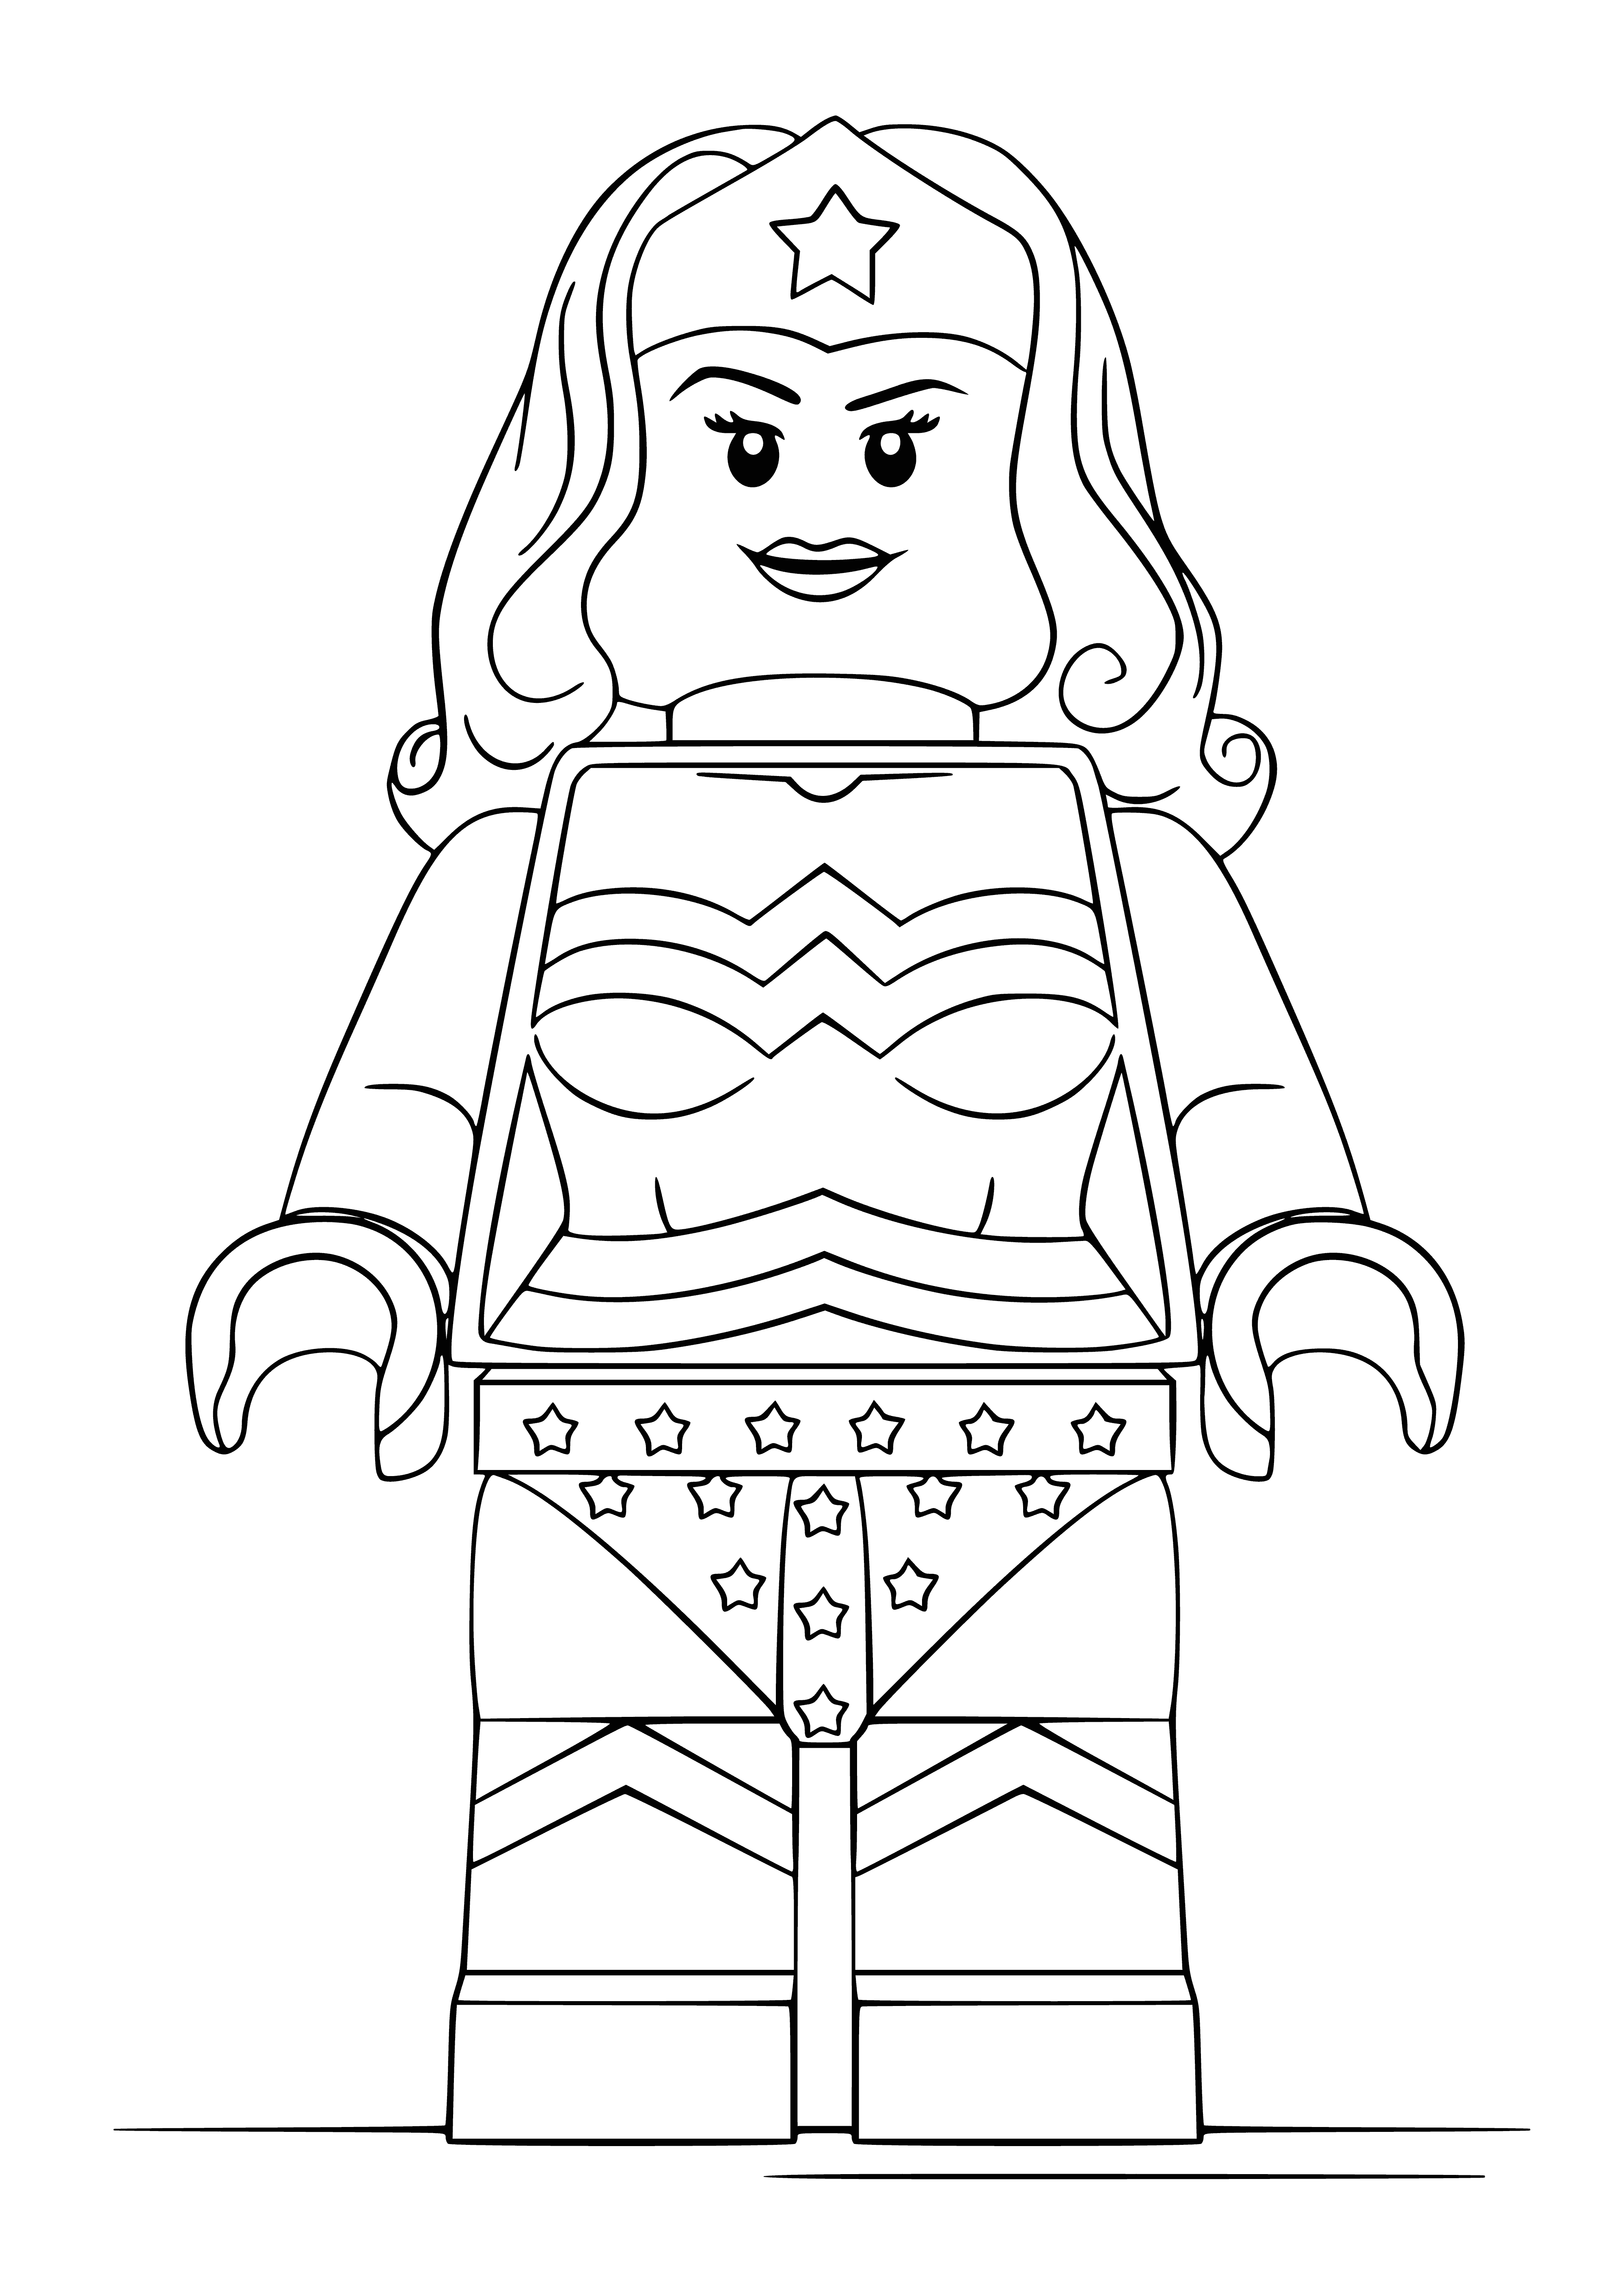 coloring page: Superwoman flying with red cape, blue suit and yellow logo, dark brown hair pulled back in a bun.